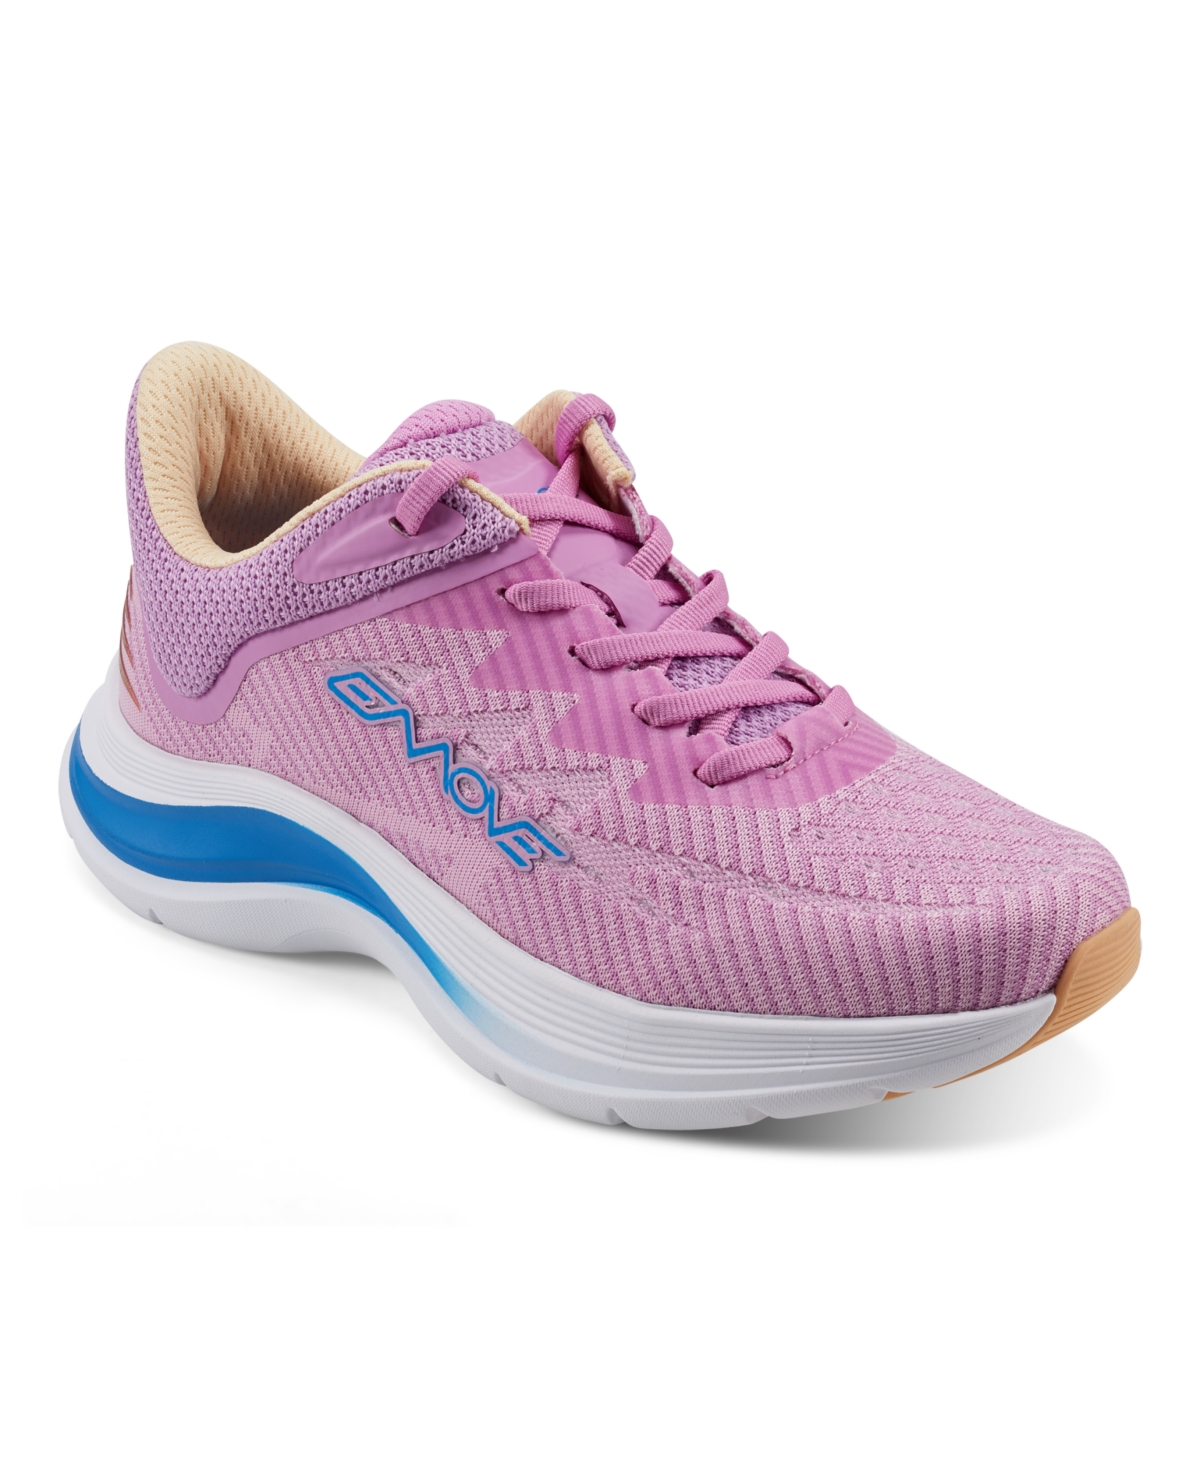 Women's Easymove Round Toe Lace-Up Sneakers - Pink Multi